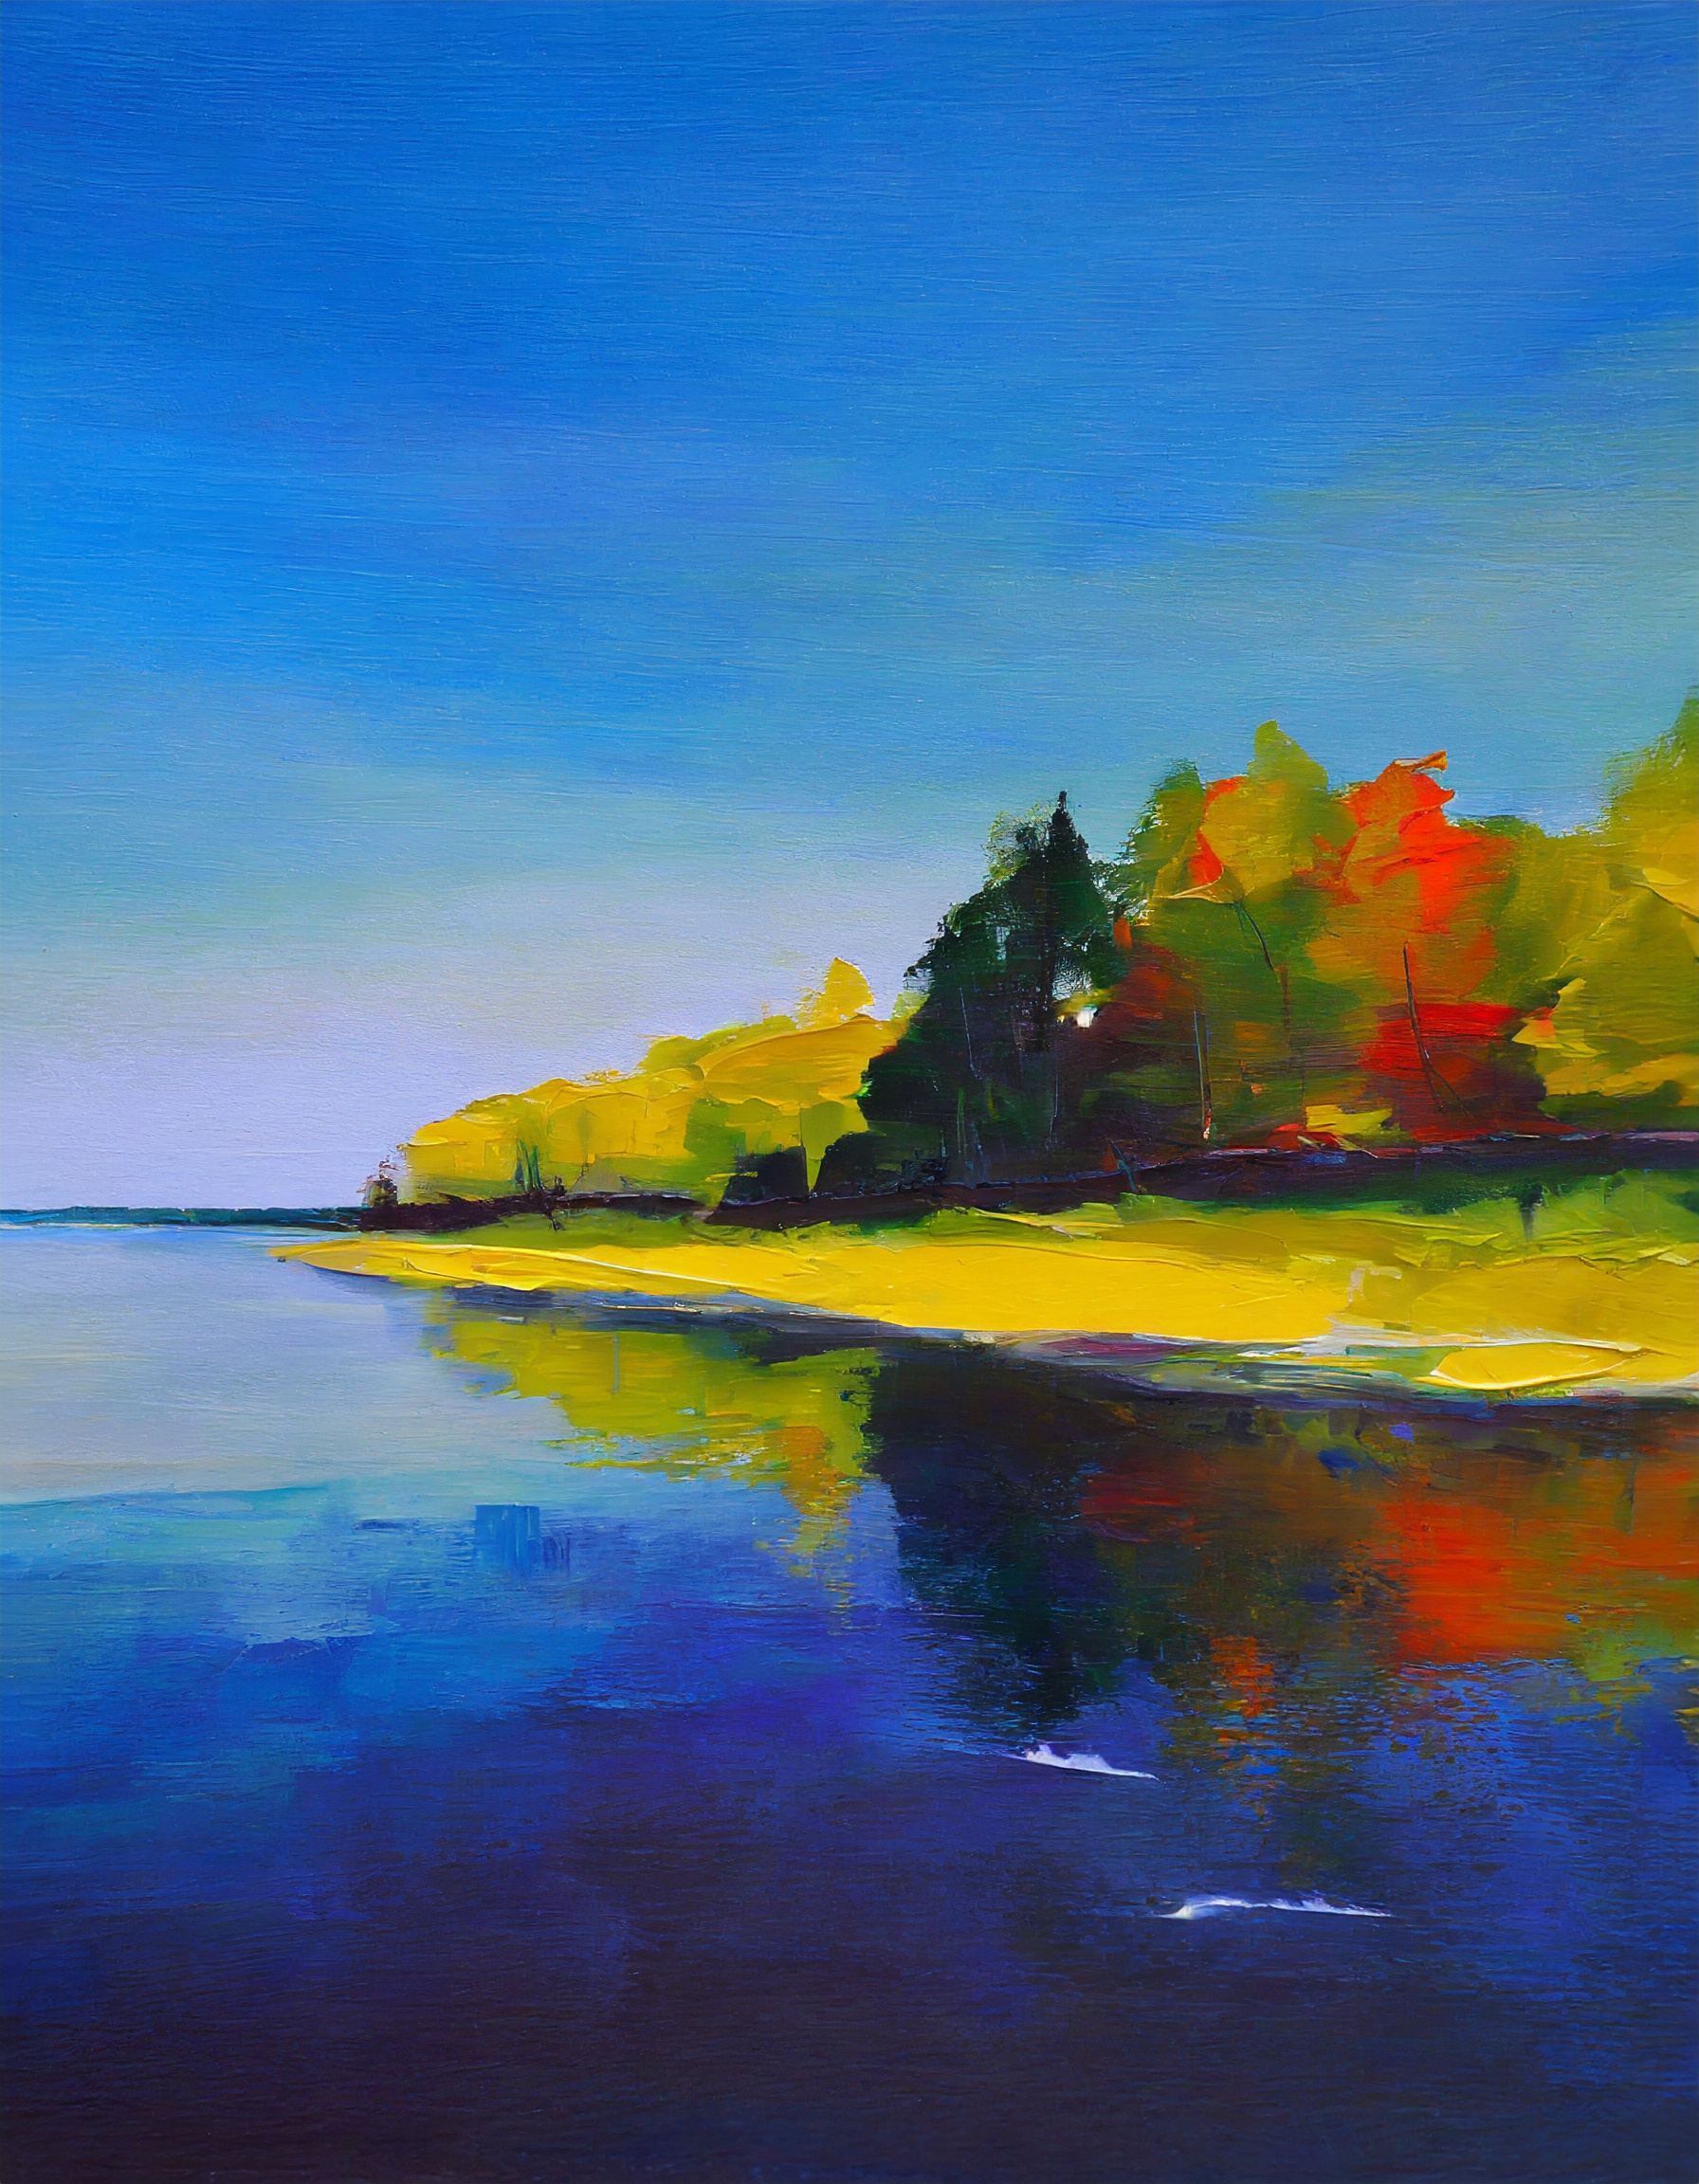 Digital painting made in collaboration with Adobe Firefly showing a shoreline with fall colors and reflective lake. The shoreline is on the right of the painting and the expansive lake stretches out on the left, indicating a Great Lake.